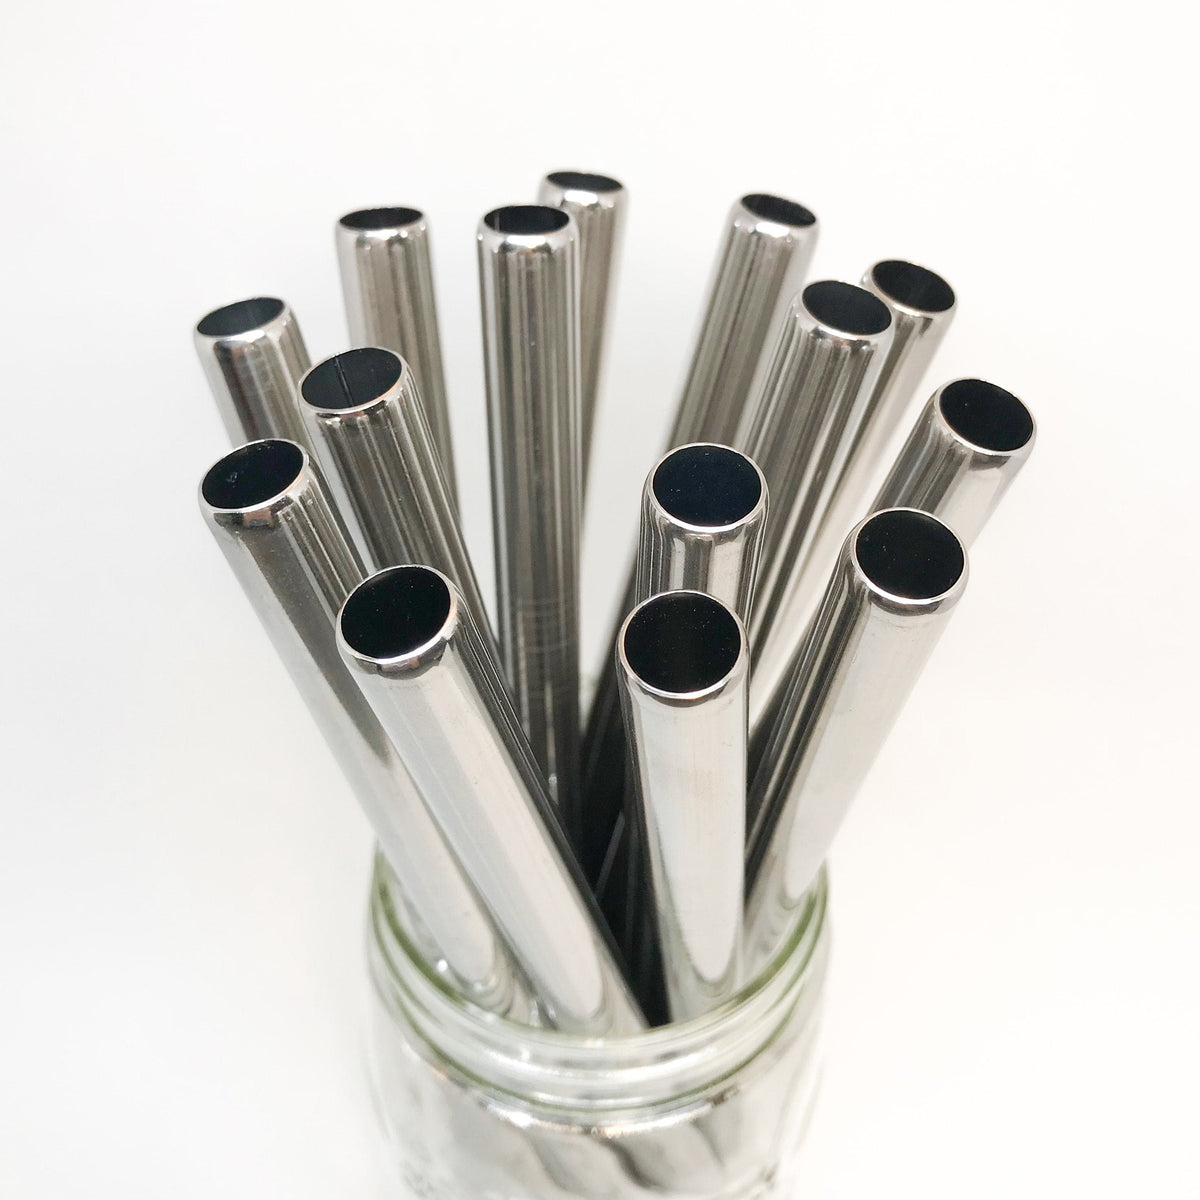 dishwasher safe and toxin free 8.5 inch silver stainless steel reusable bubble tea straws